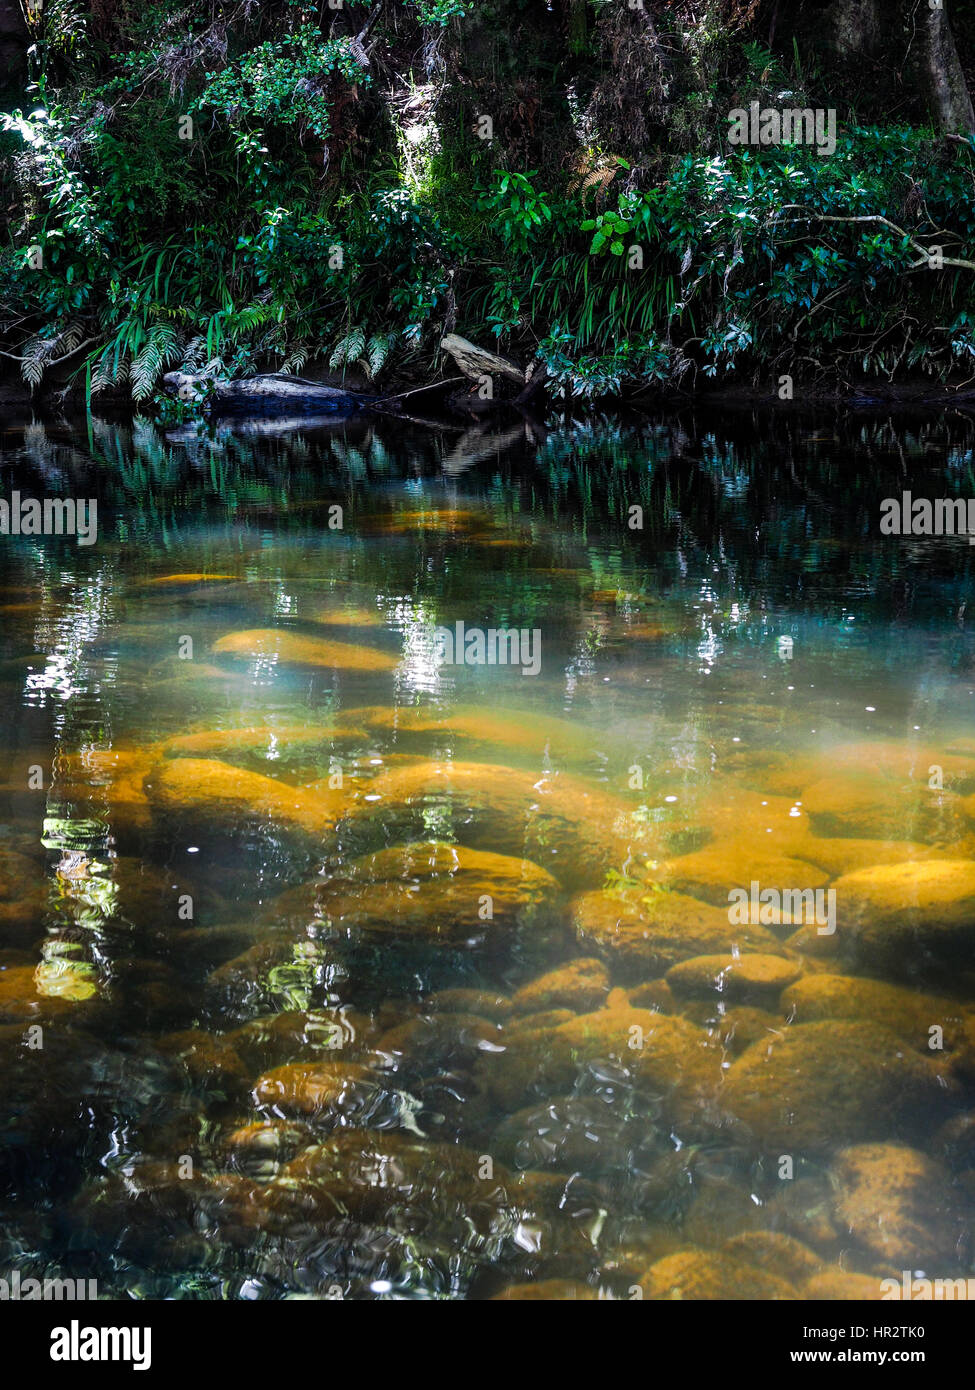 Ruatiti Stream,  round river stones, native forest growing, clear water and sunshine, warm summer day. The boulders are coated with slippery algae. Stock Photo